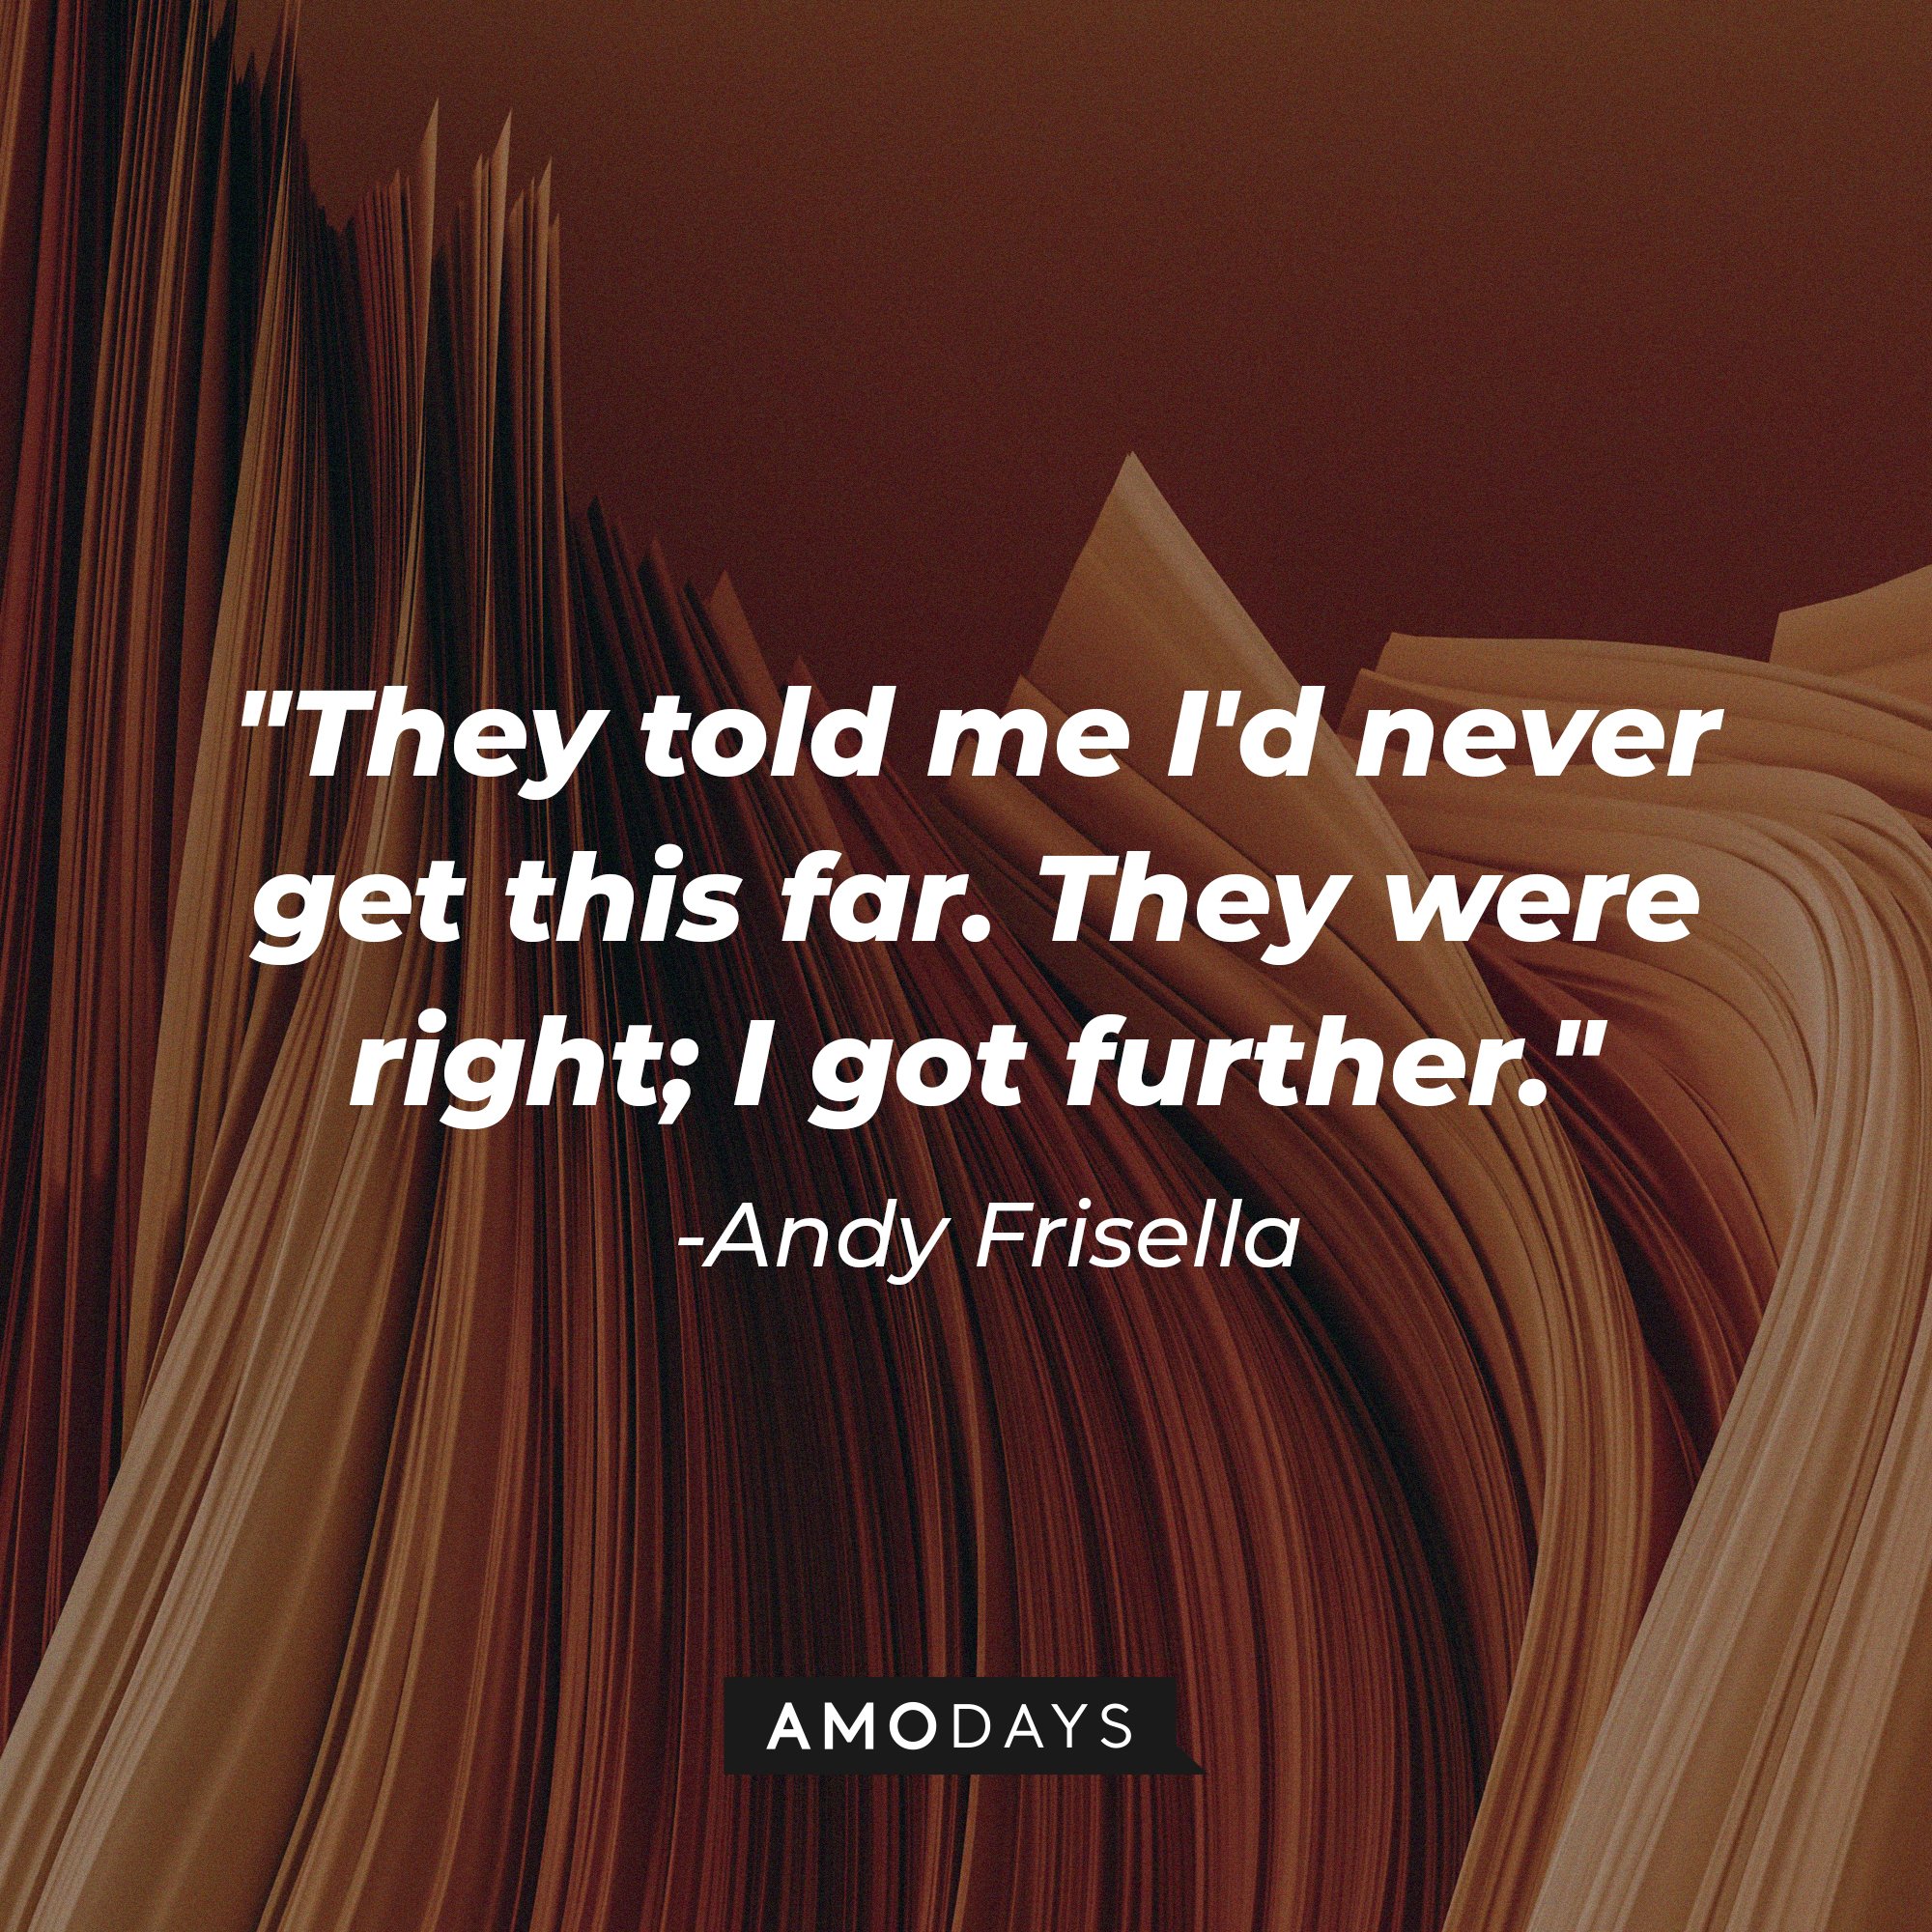 Andy Frisella's quote: "They told me I'd never get this far. They were right; I got further." | Image: AmoDays